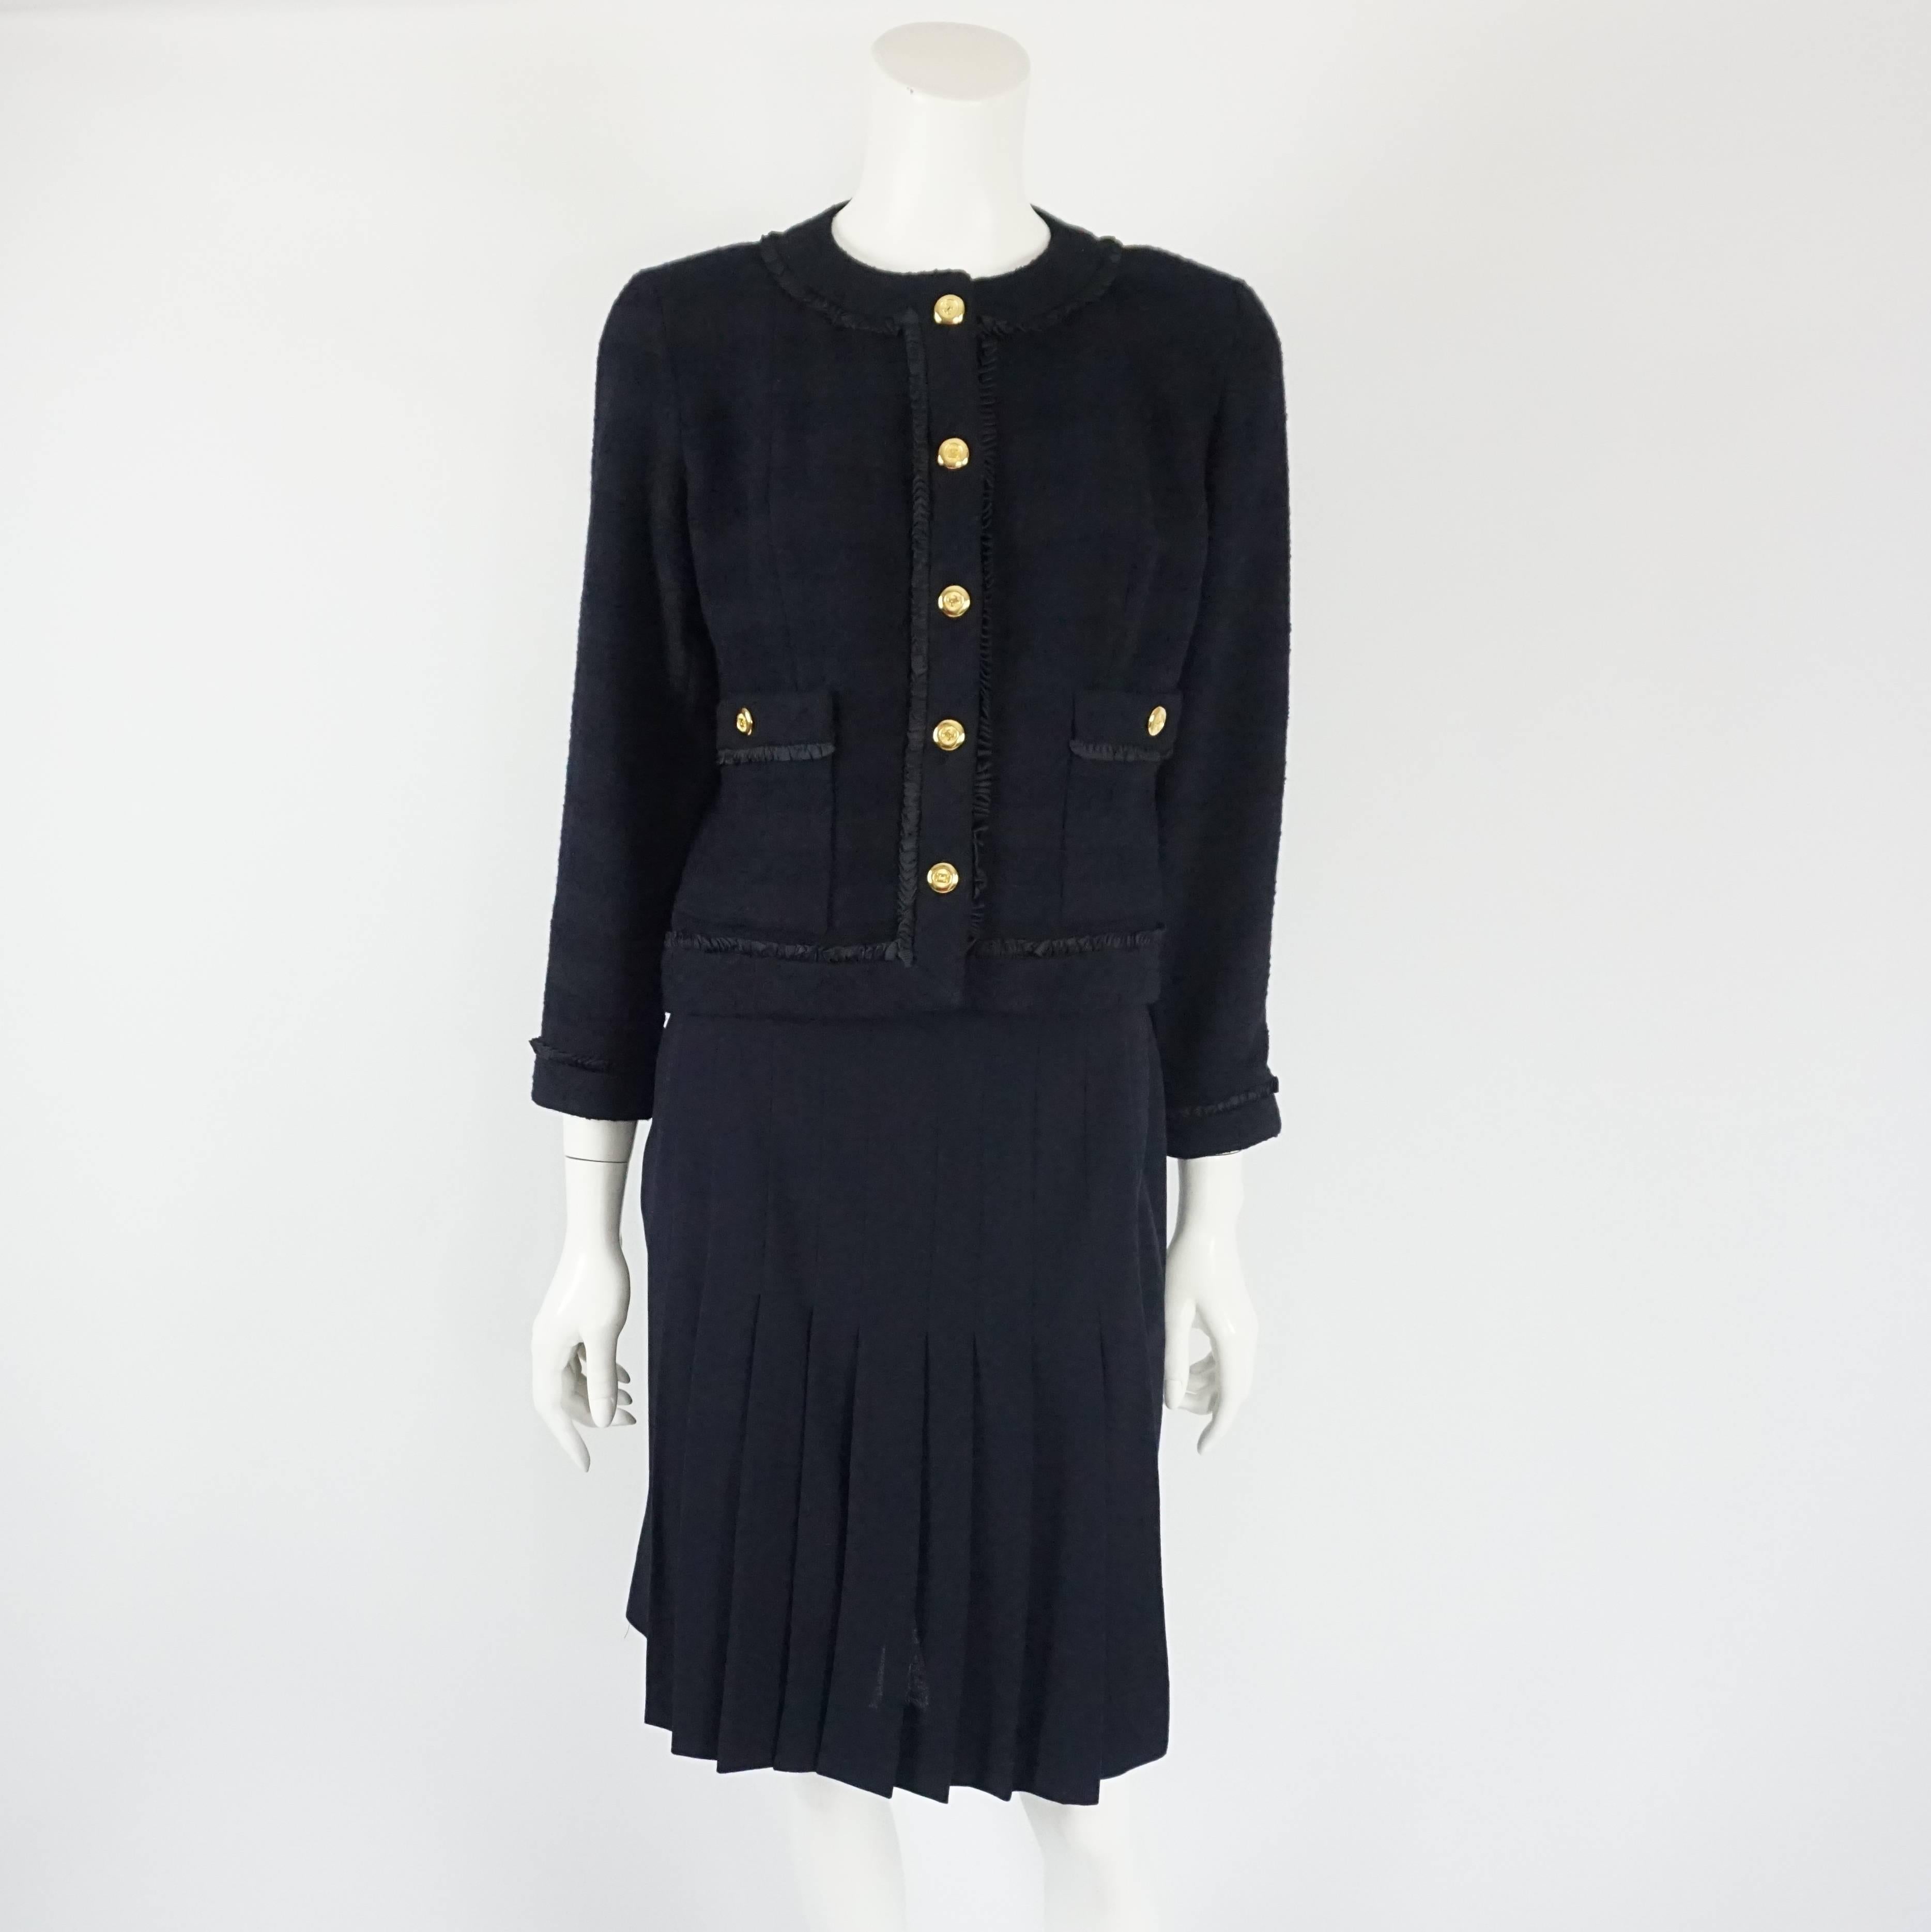 This Chanel navy skirt suit is a classic, timeless piece. It features a textured single breasted jacket with small silk ribbon detail individually attached making an illusion of a ruffle trimmed along the entire jacket, 5 front gold buttons, 2 patch